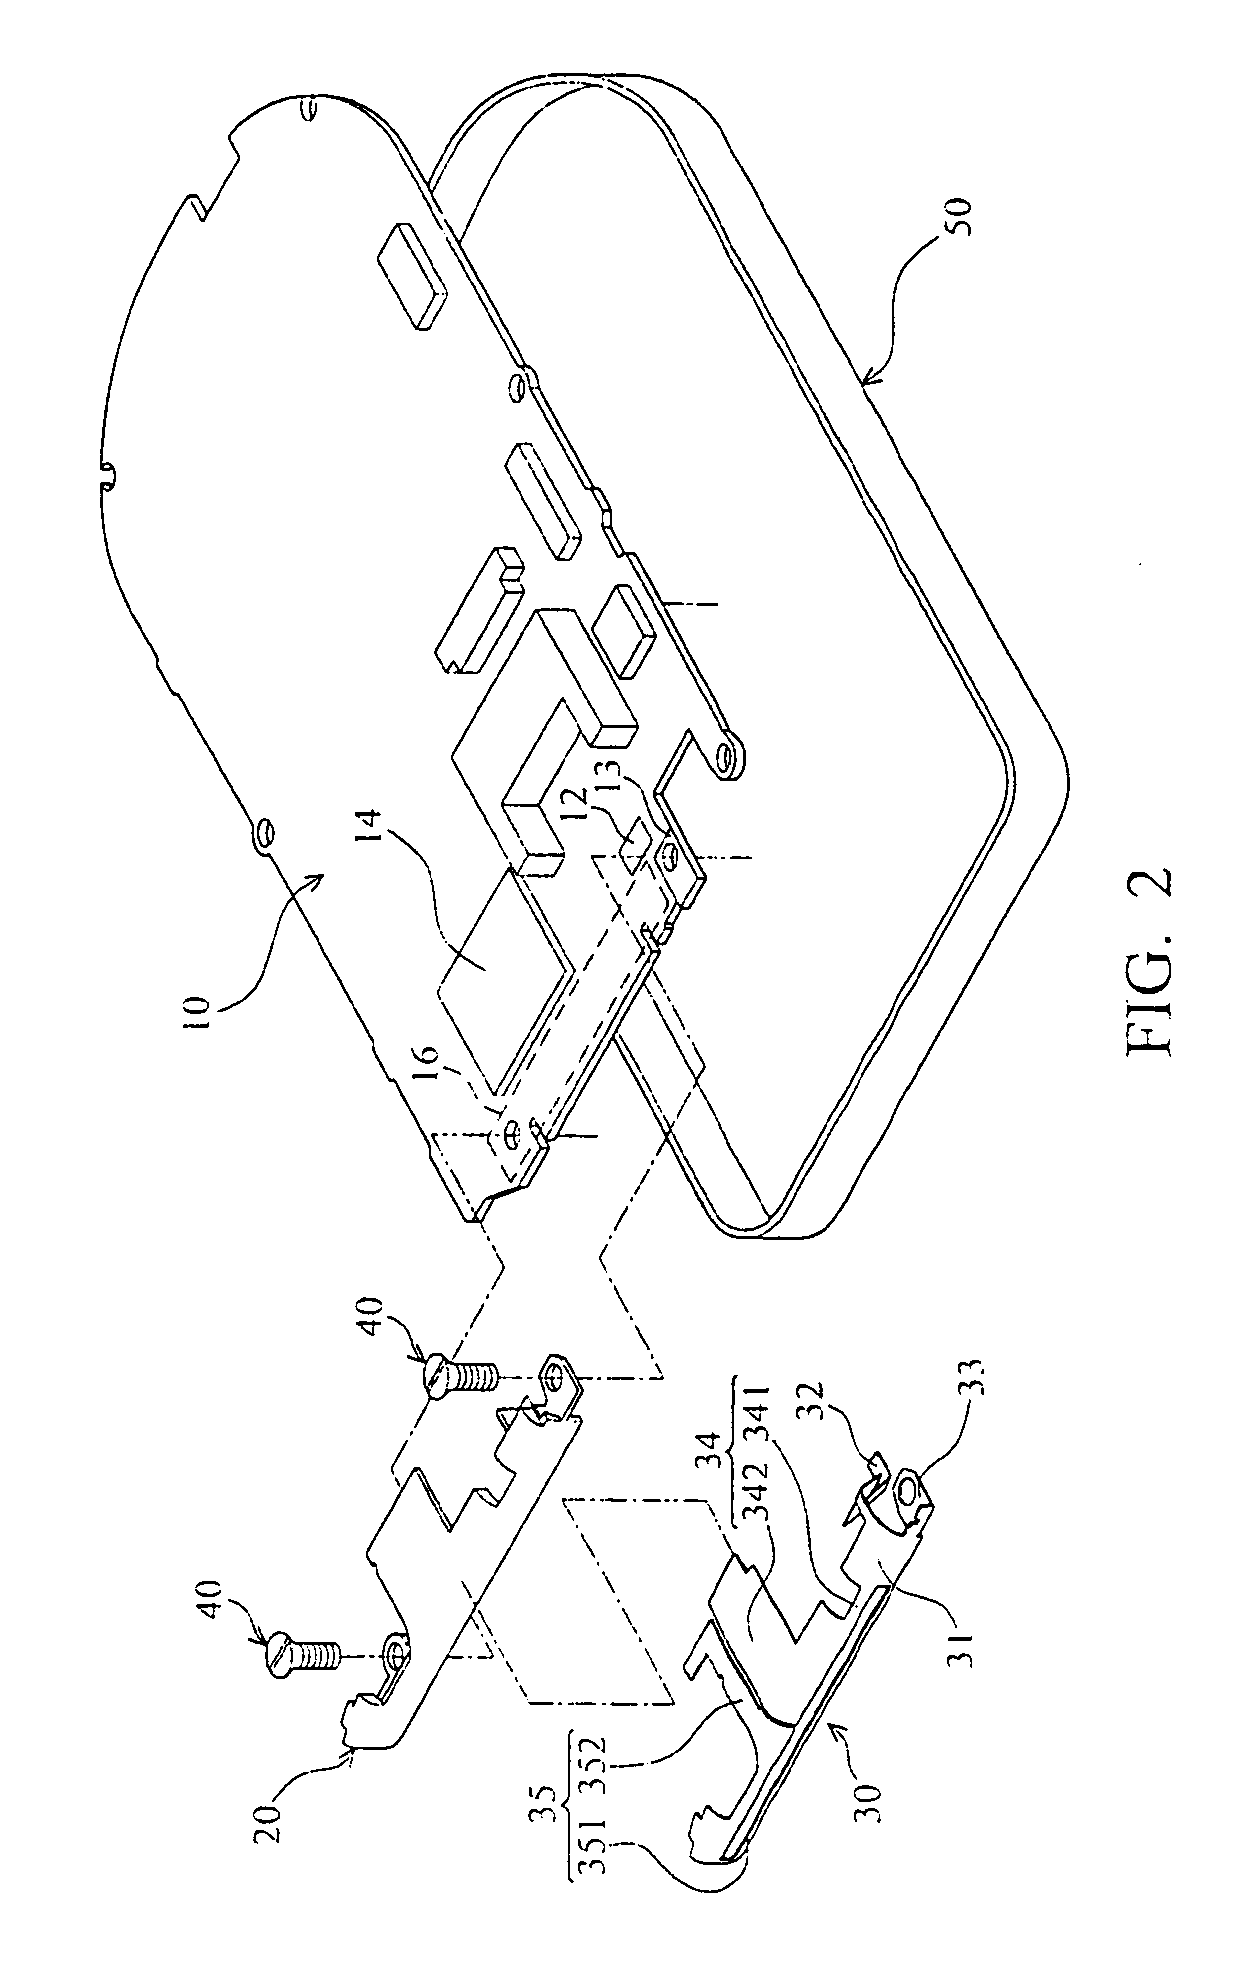 PIFA/monopole hybrid antenna and mobile communications device having the same